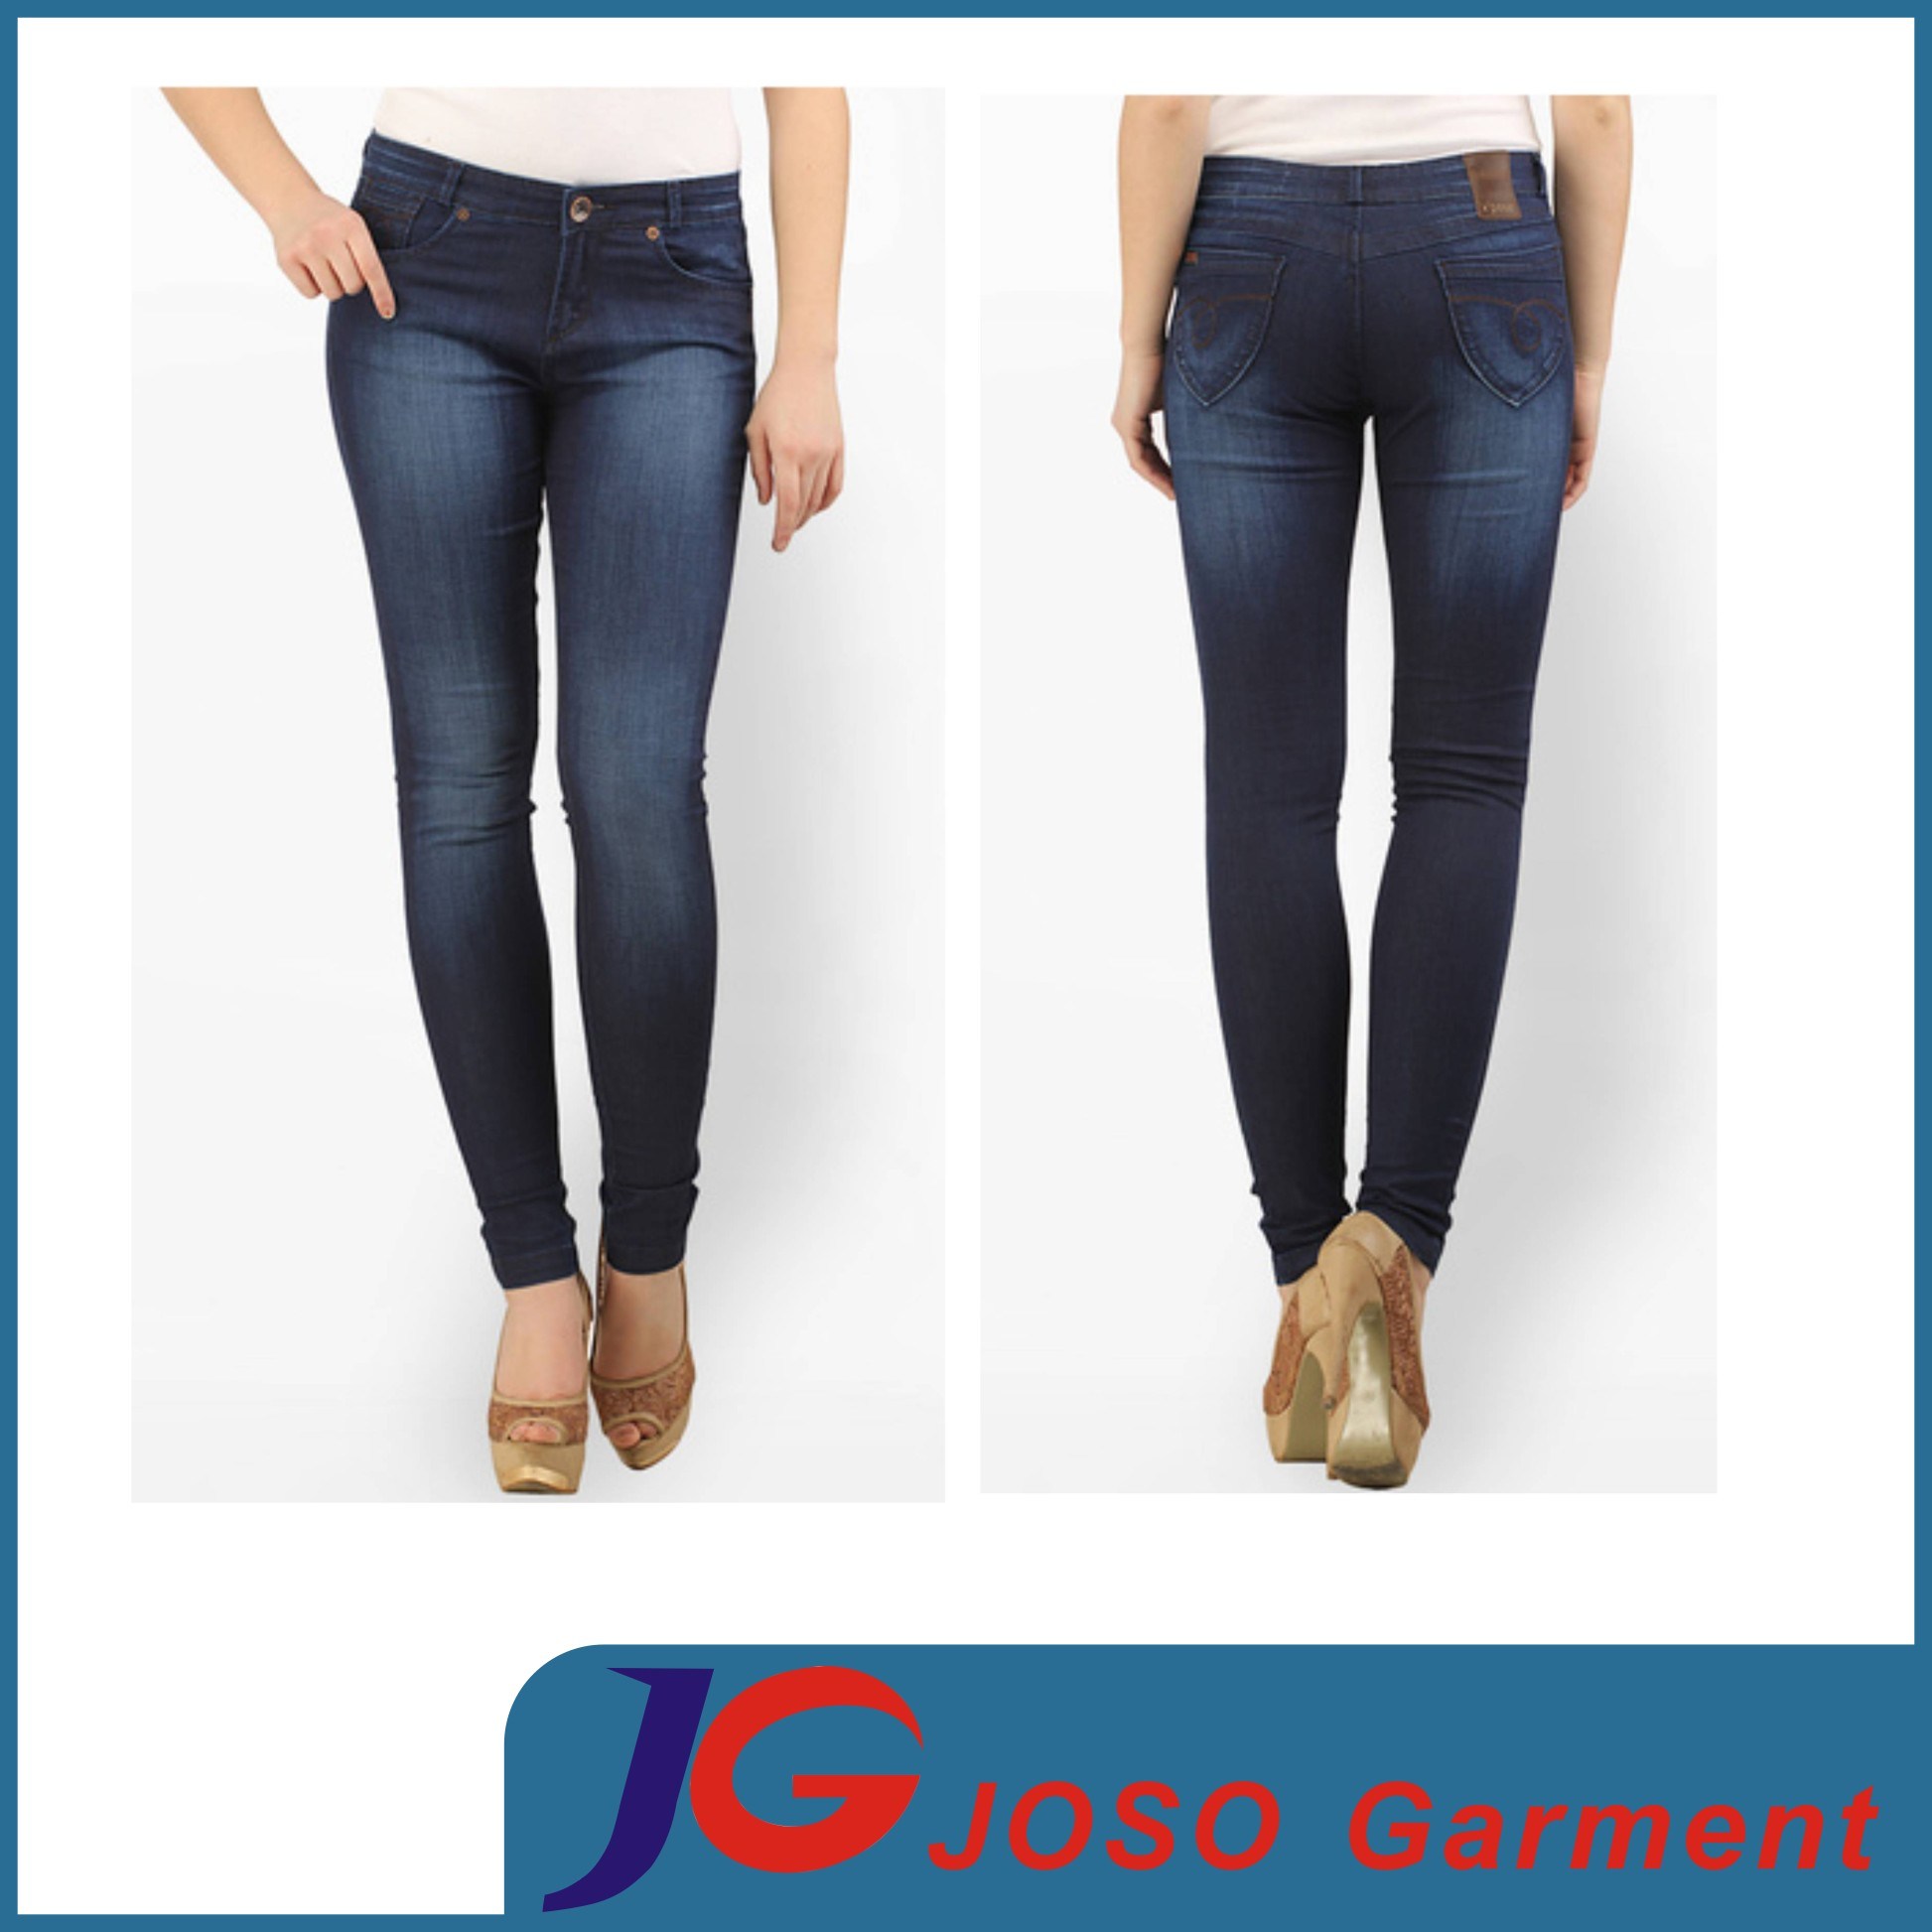 Black Length Jeans Skinny Fit Jeans Buy for Lady (JC1366)